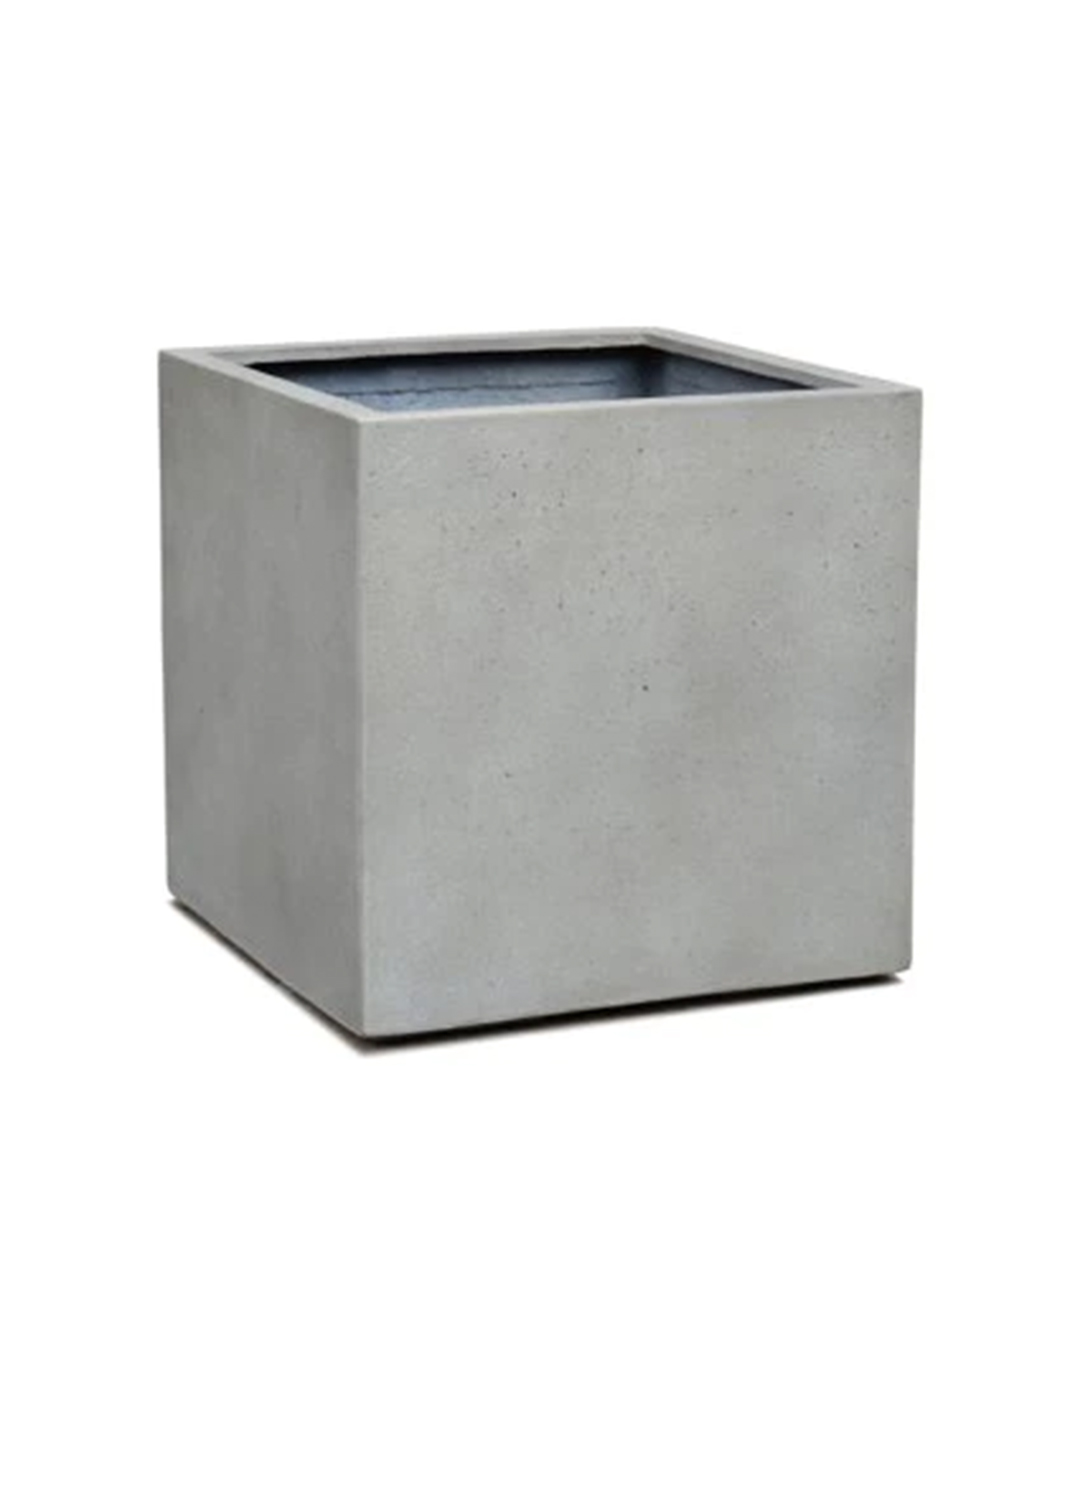 Square GRP Pot Planter starting rate